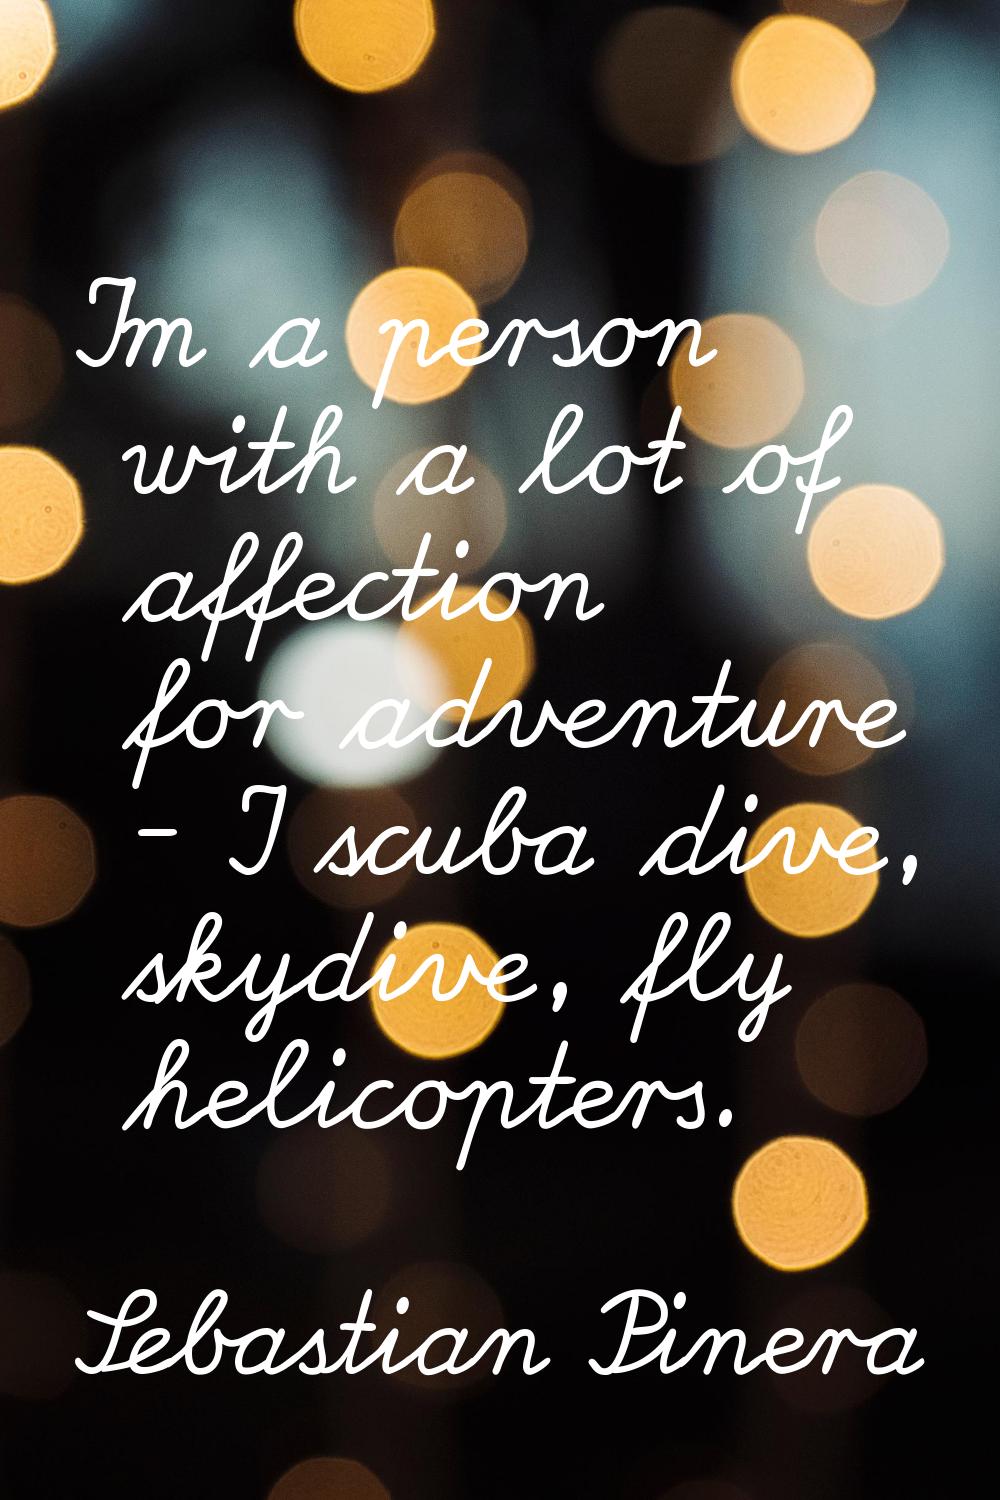 I'm a person with a lot of affection for adventure - I scuba dive, skydive, fly helicopters.